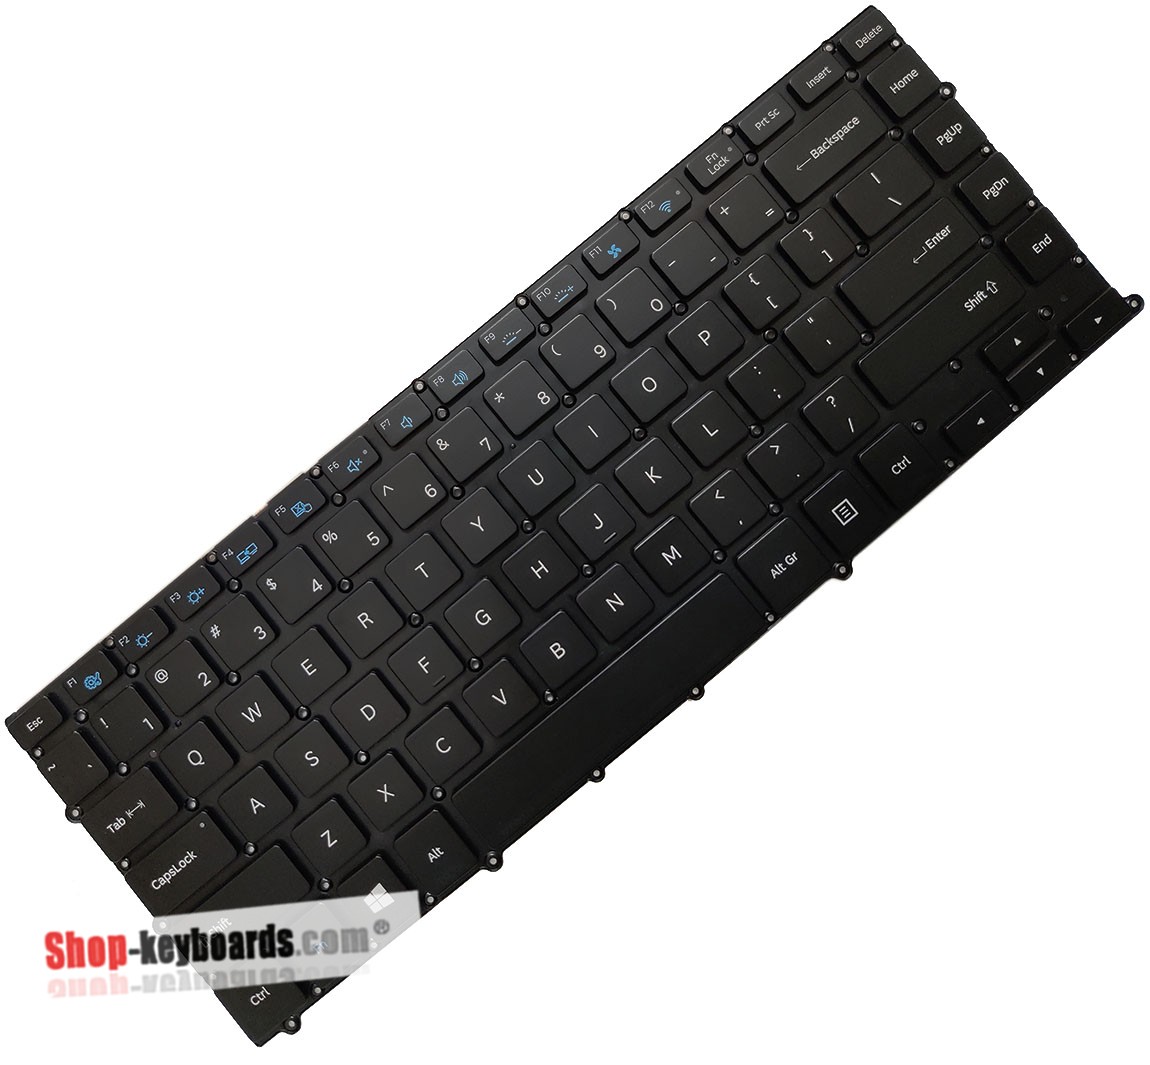 Samsung NP900X4C Keyboard replacement